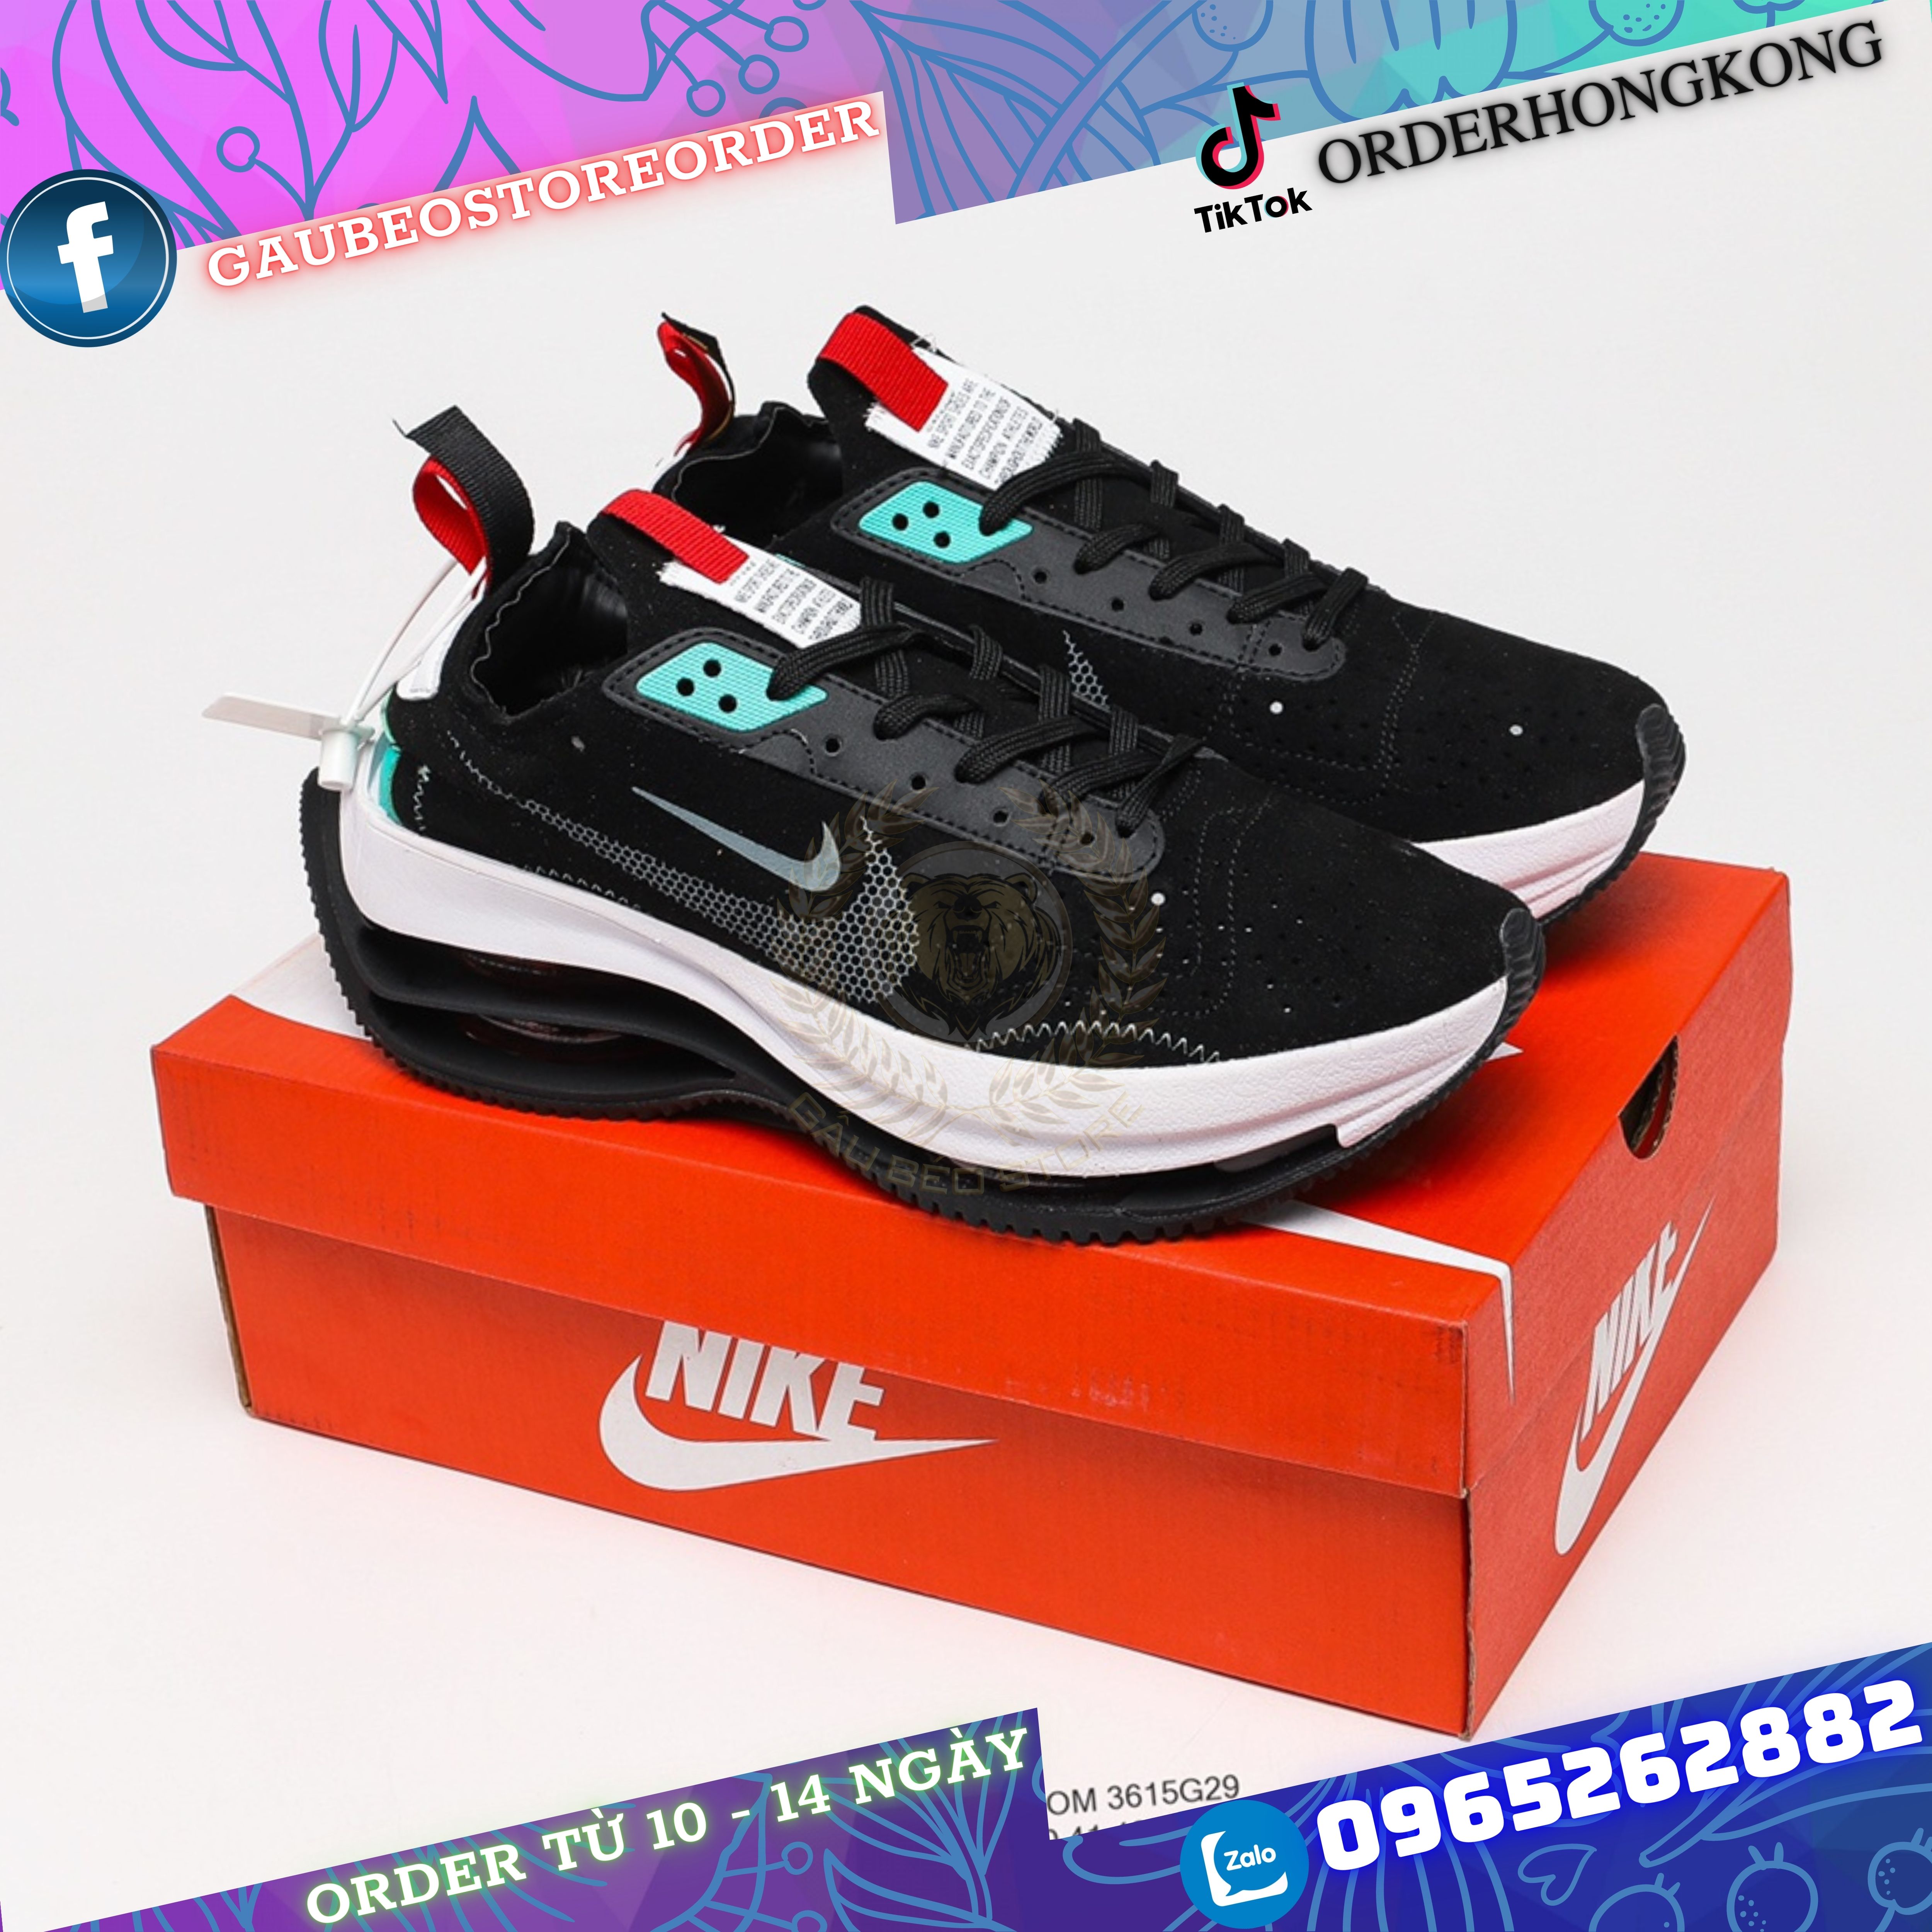 Nhận Order Hỗ Trợ Free Ship Giày Outlet Store Sneaker _Nike Air Zoom Tempo Rlacemrnt NEXT% MSP: 3615G294 gaubeostore.sho